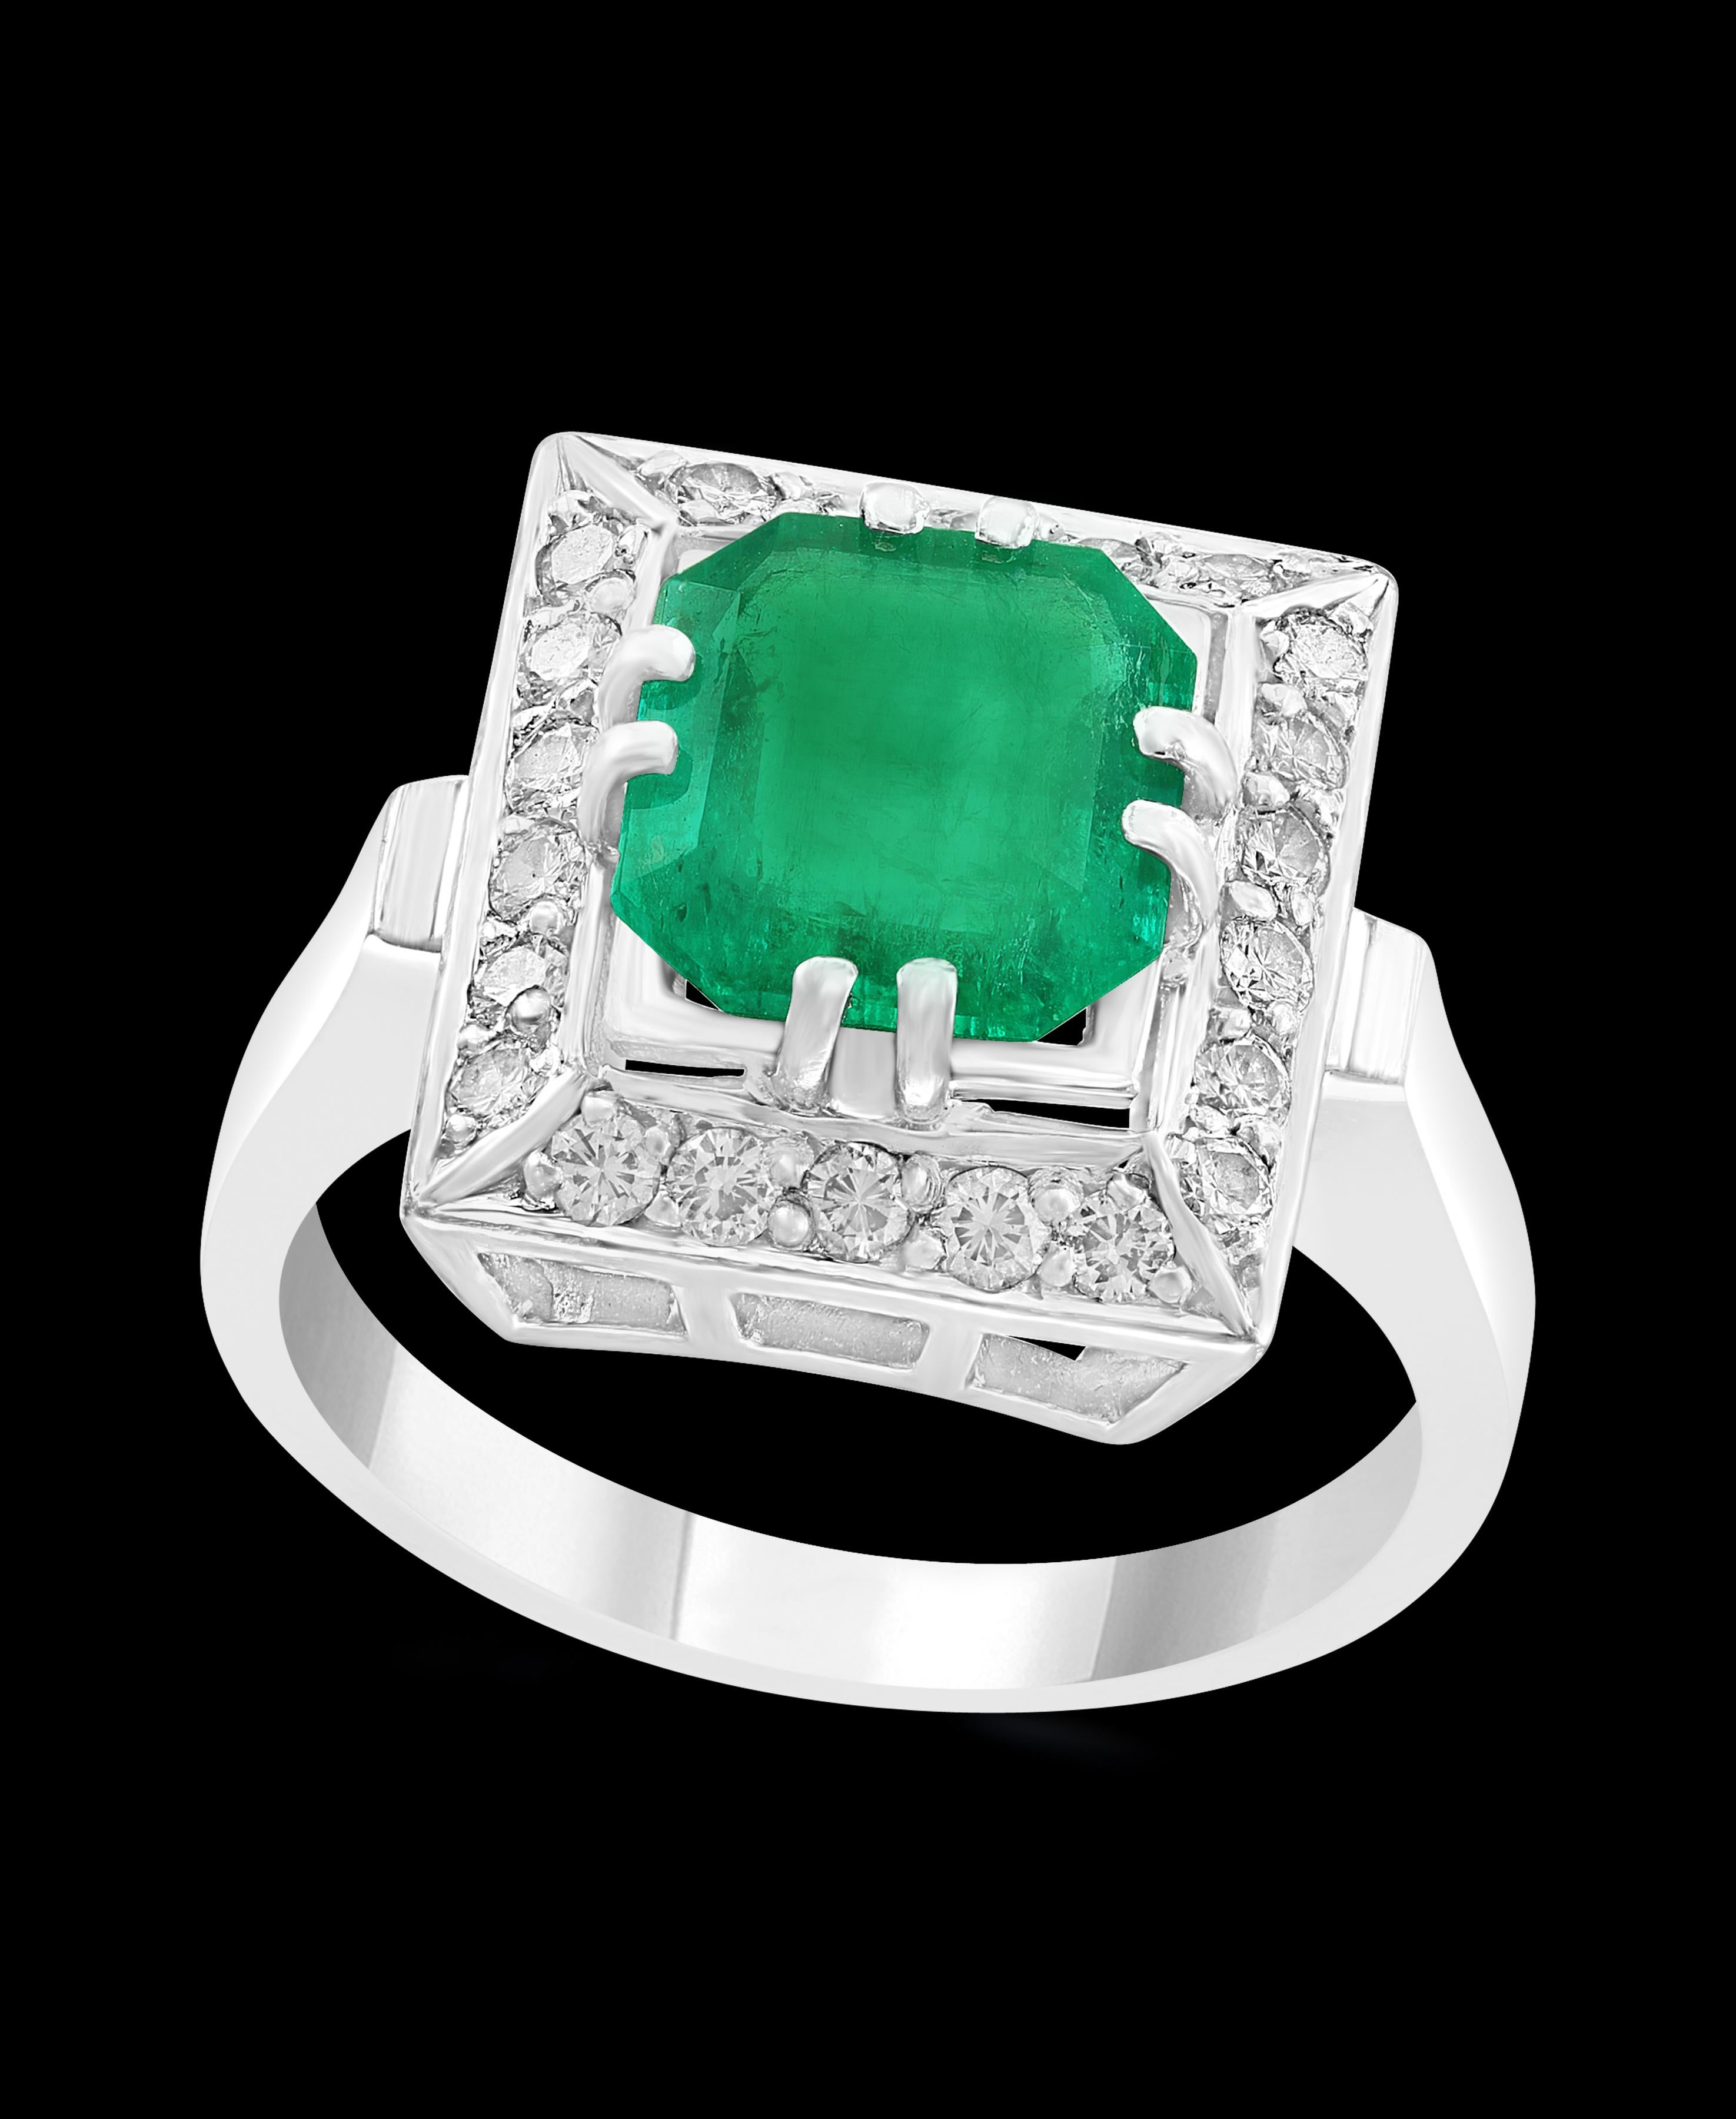 A classic, Cocktail ring 
3 Carat  Colombian Emerald and Diamond Ring, Estate, no color enhancement.
Gold: 18 carat white gold 
Weight: 8.5 gm
 Diamonds: approximate 1.5 Carat 
Emerald: 3.0 Carat 
Origin : Colombia 
Ring size 8
Color: Deep  Green,